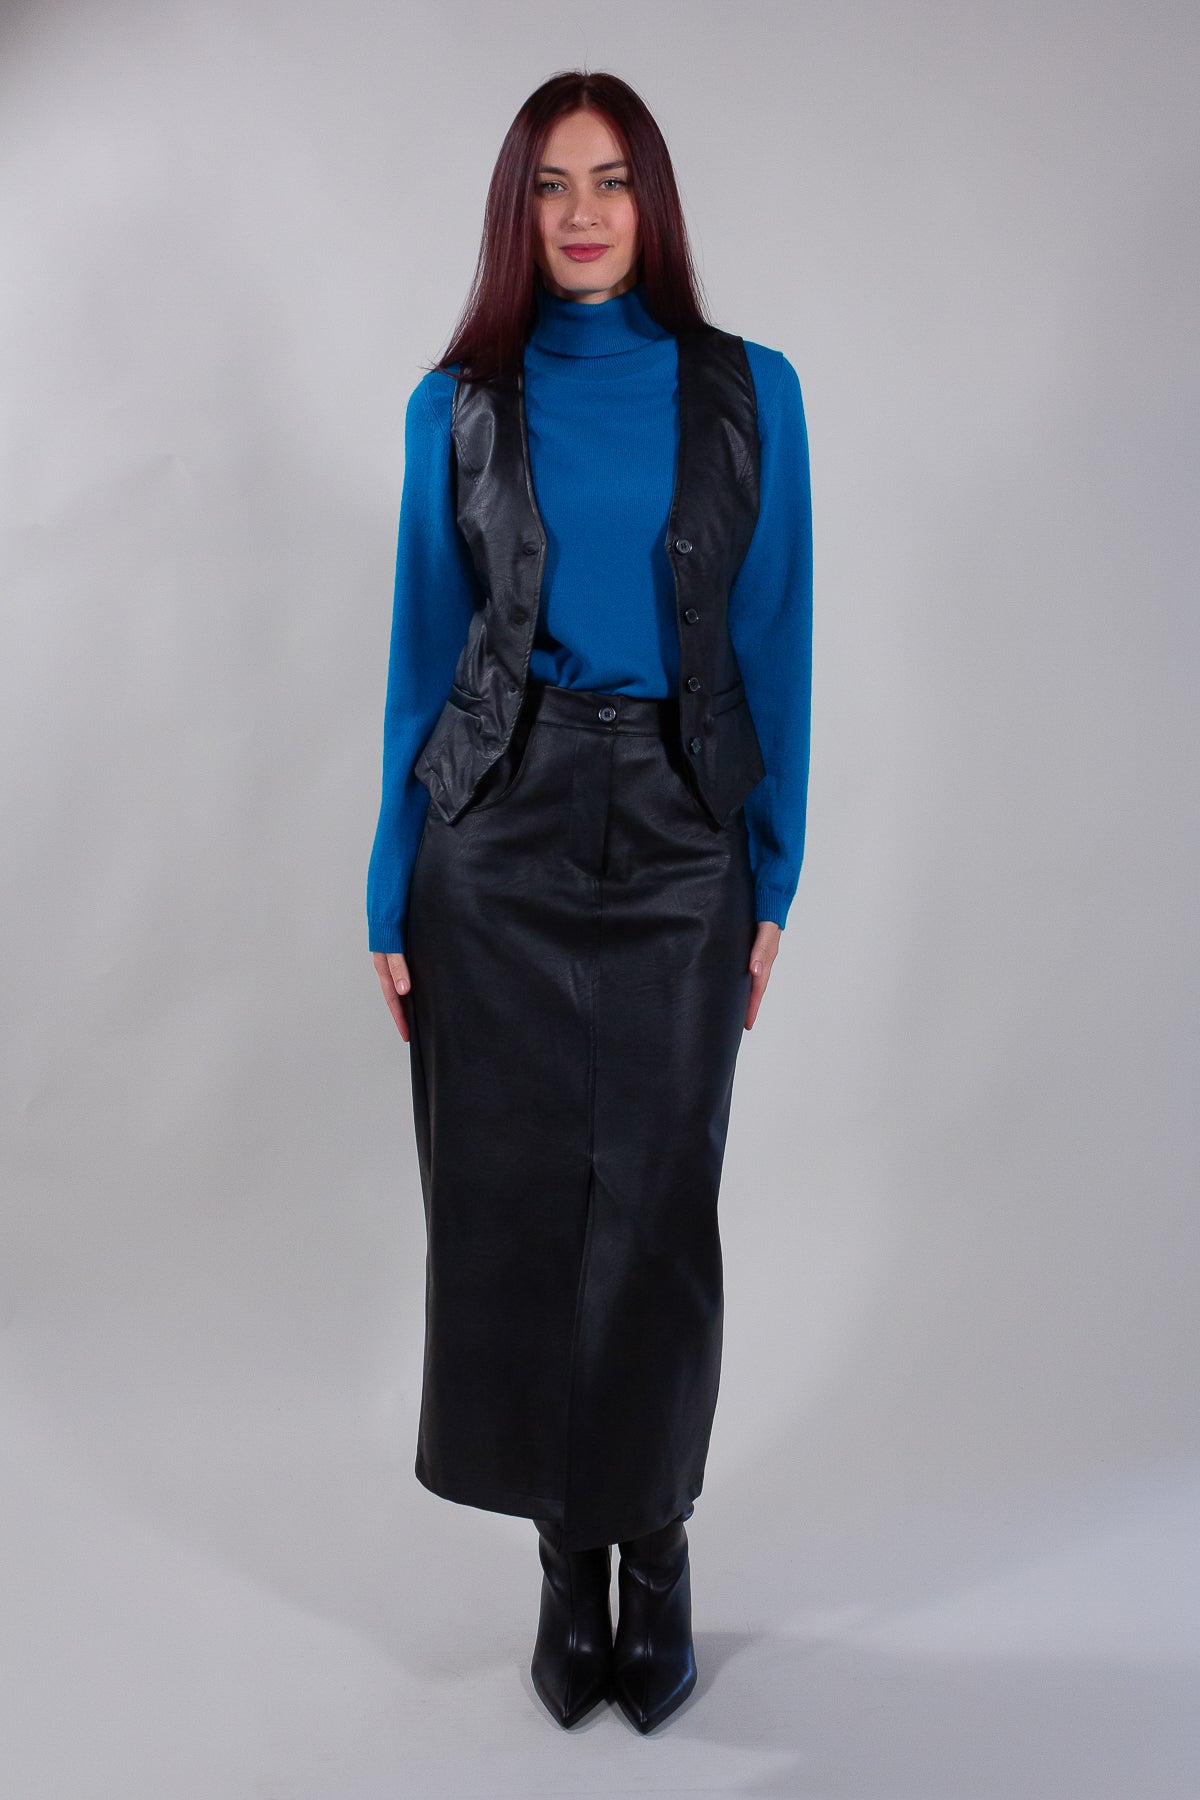 ECO-LEATHER PENCIL SKIRT